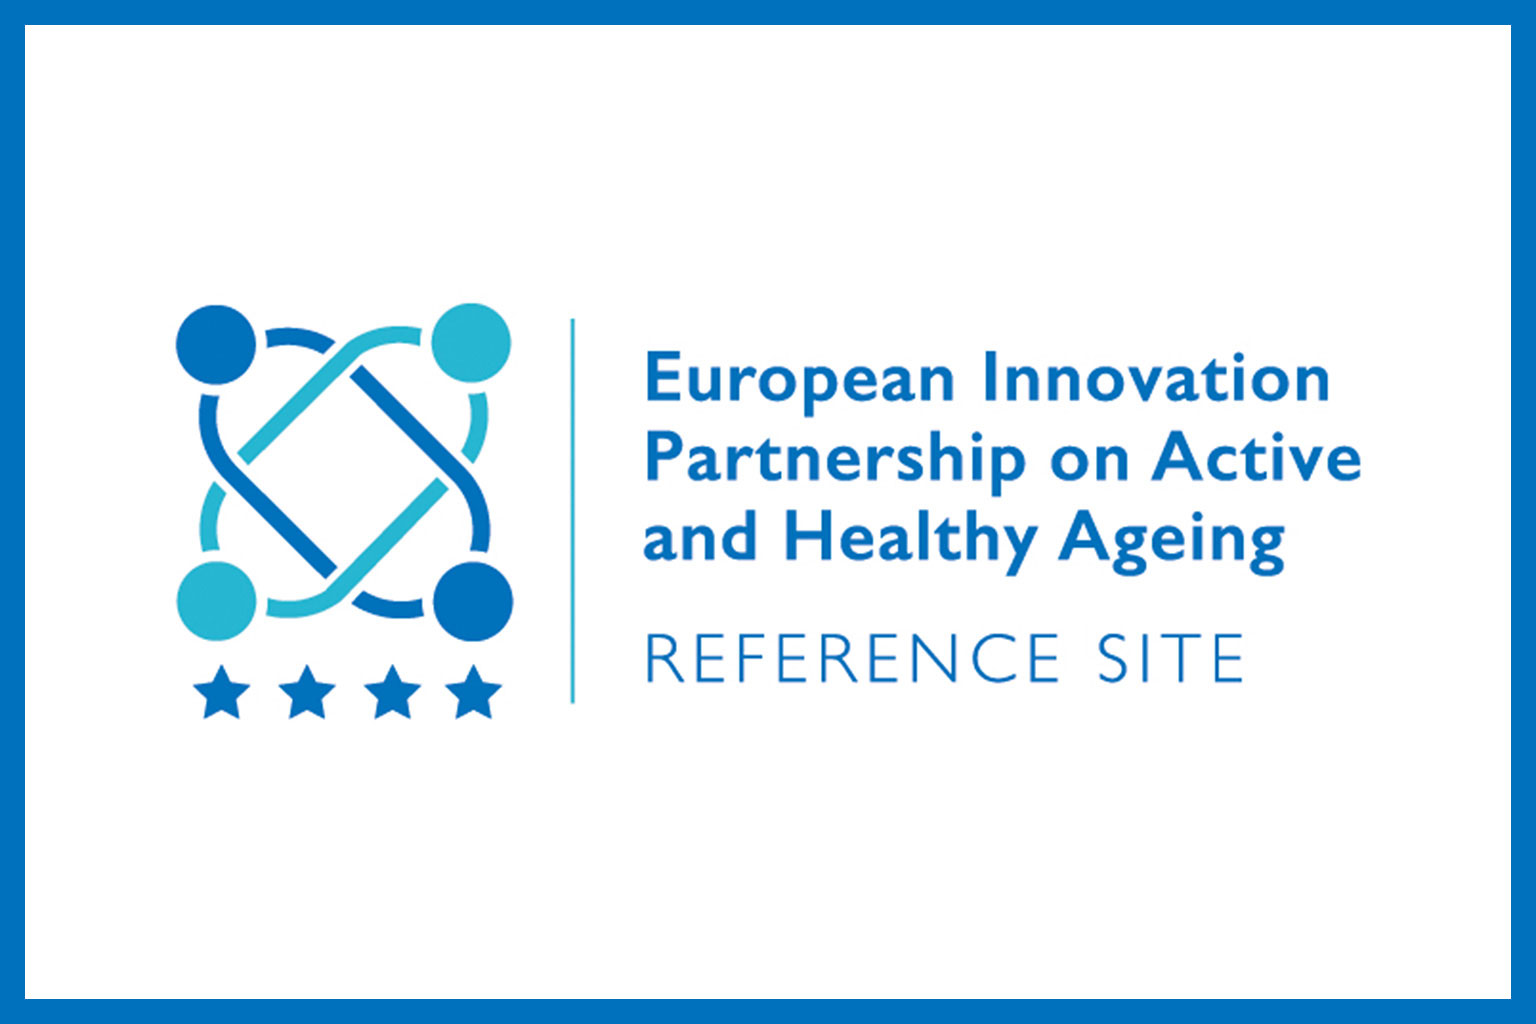 European Innovation Partnership on Active and Healthy Ageing